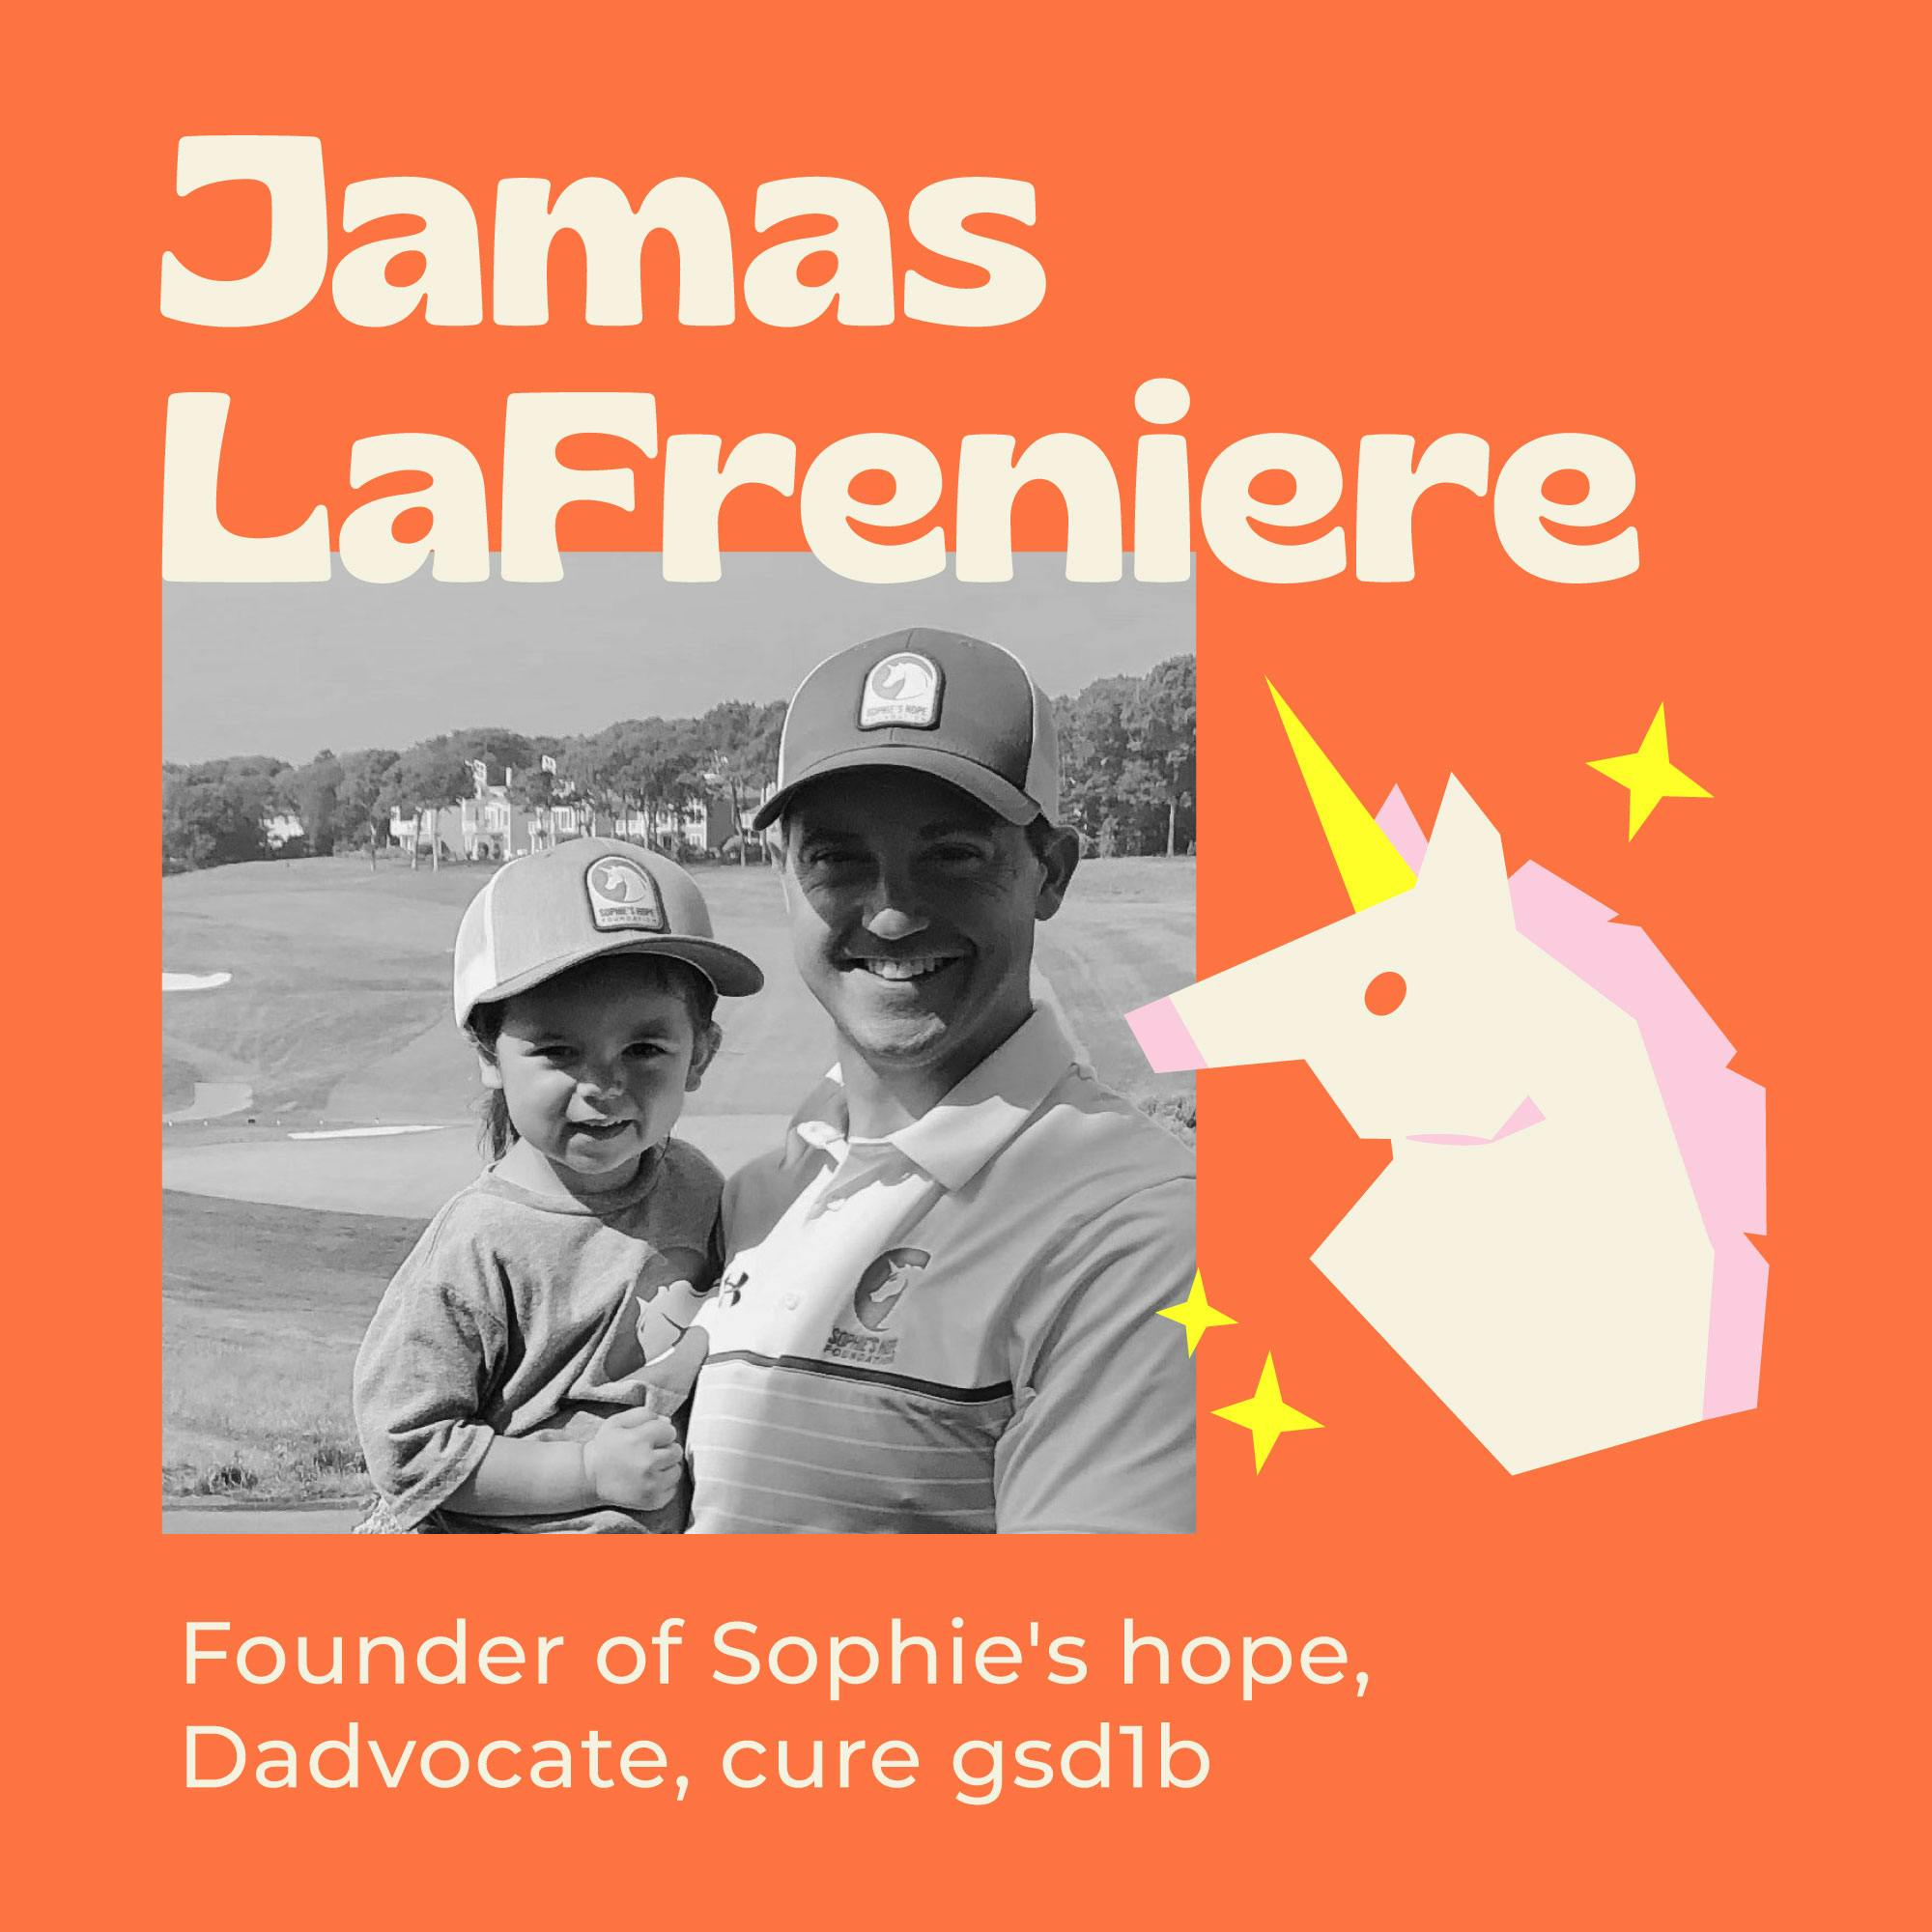 Adapting and Collaborating to Help Bring a Cure to GSD1B with Sophie's Hope Foundation Founder and Dadvocate Jamas LaFreniere